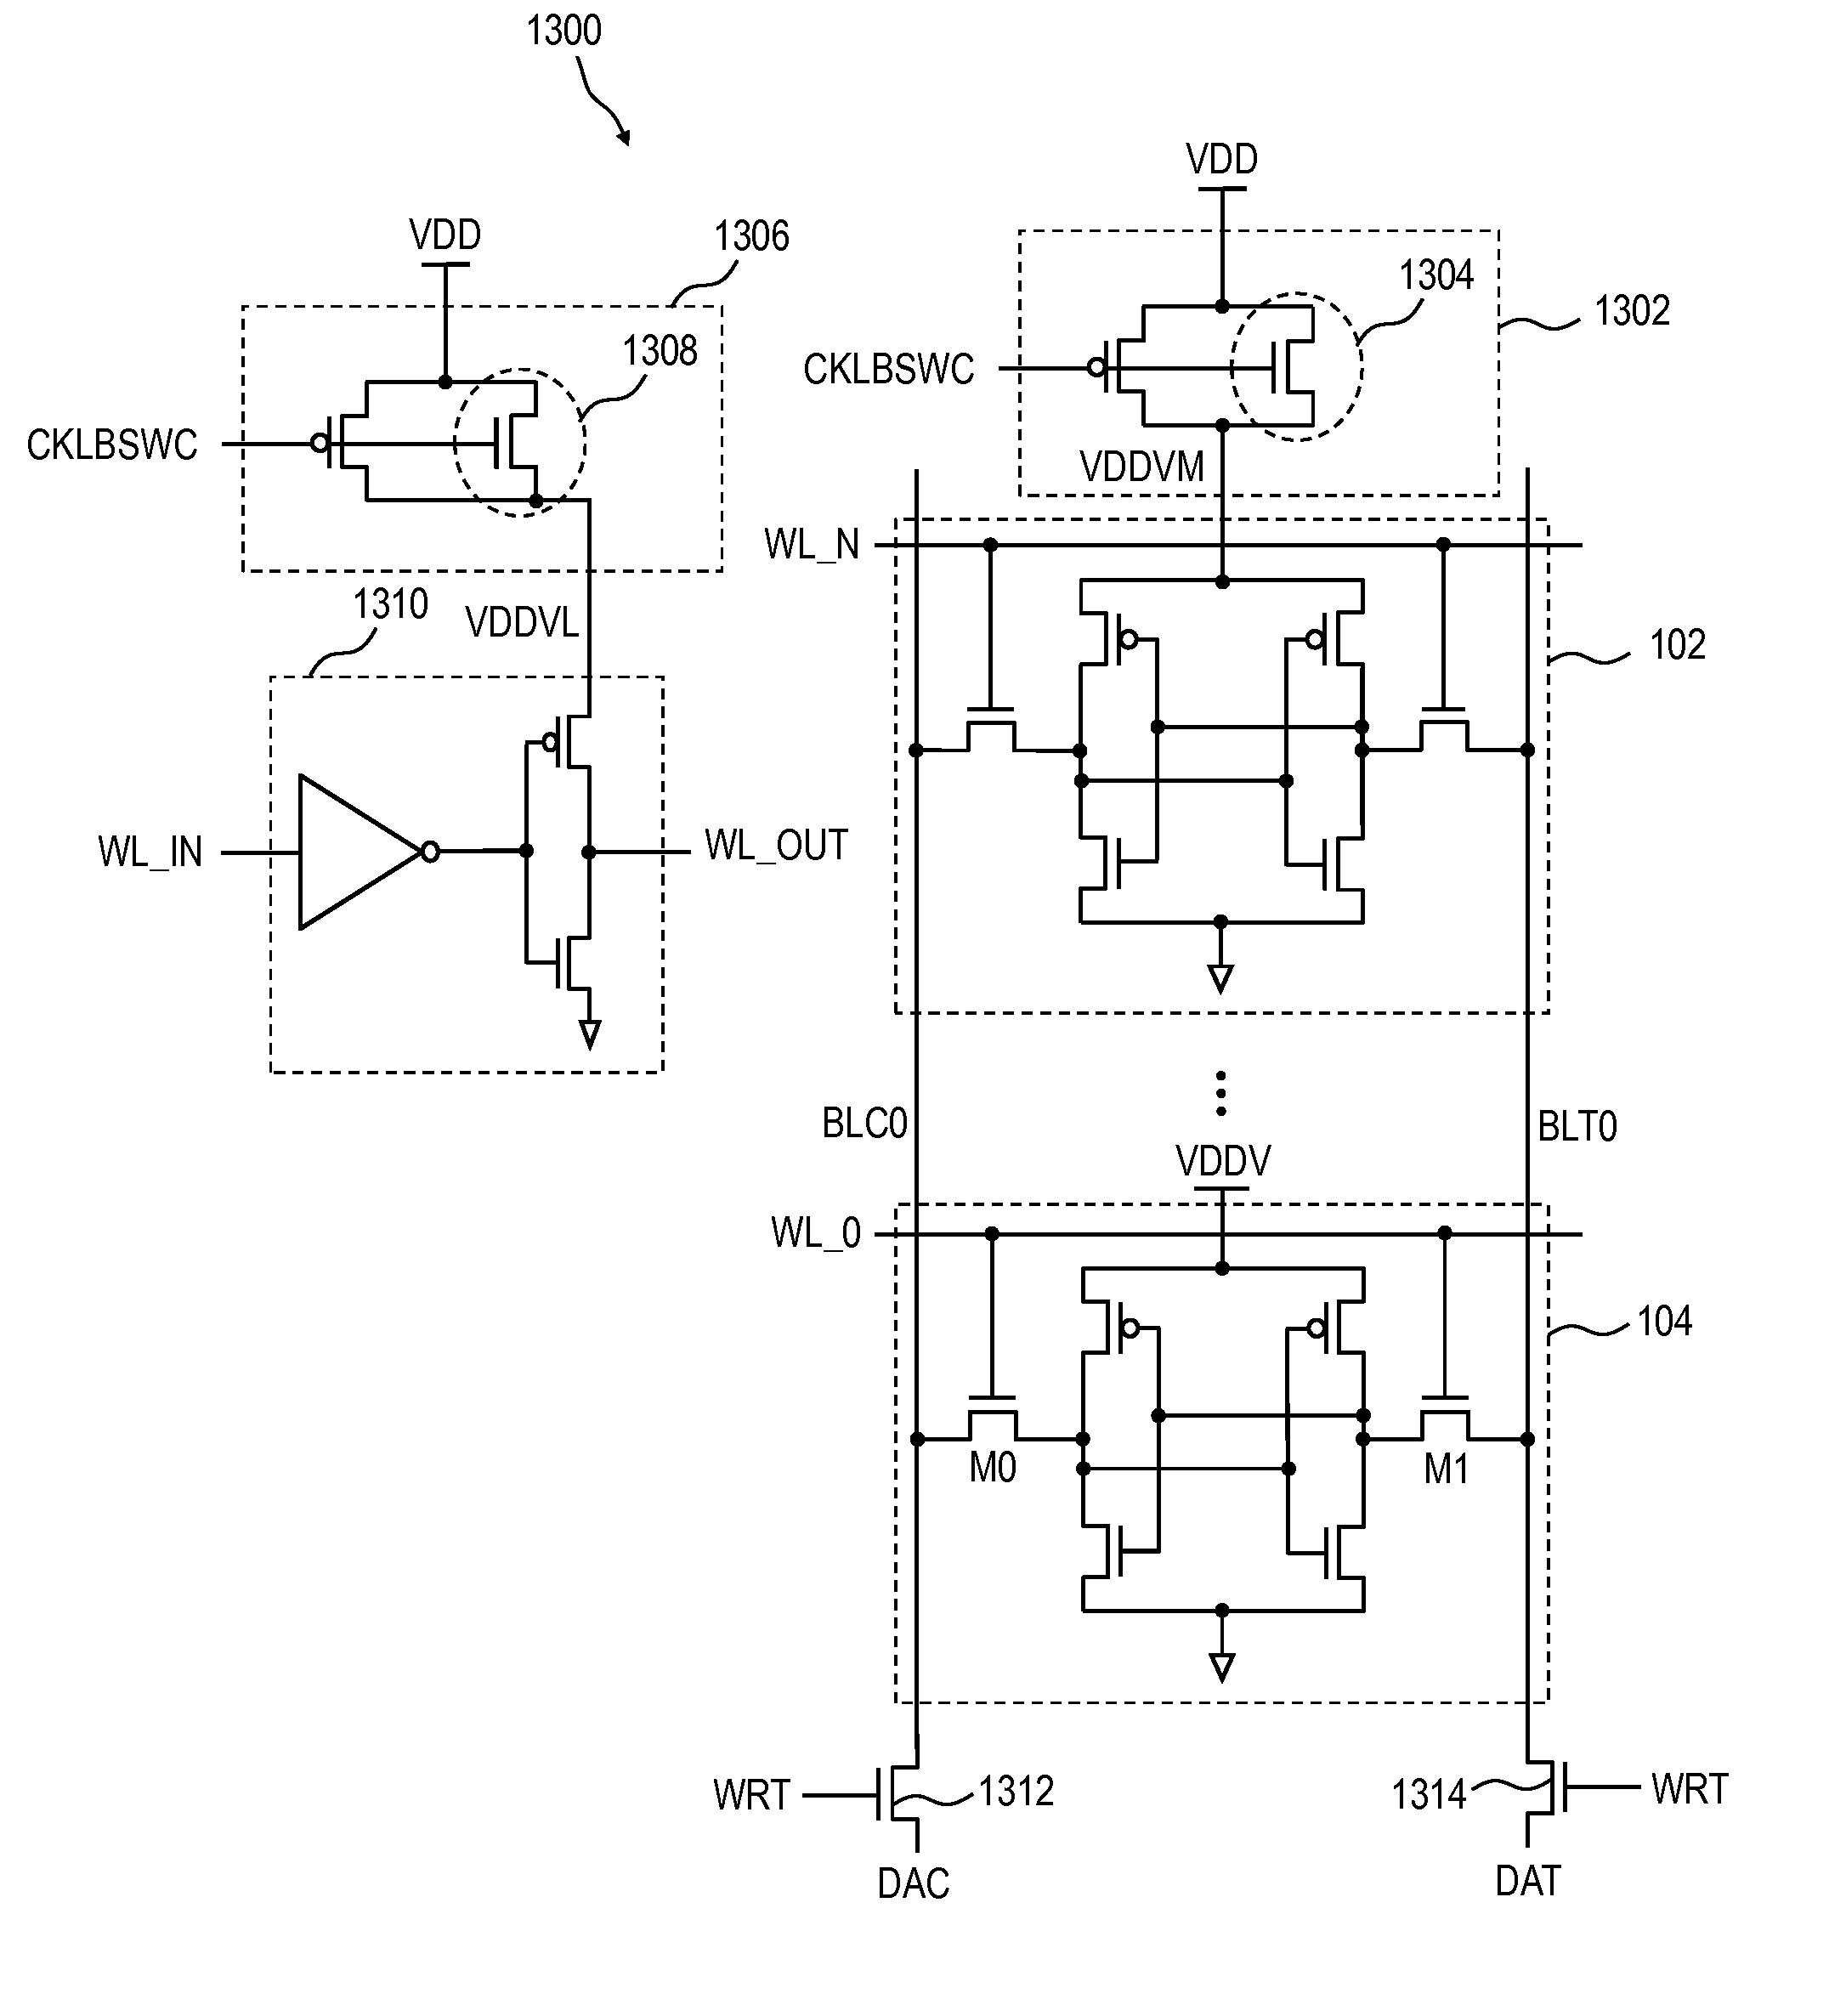 Finfet-based boosting supply voltage circuit and method